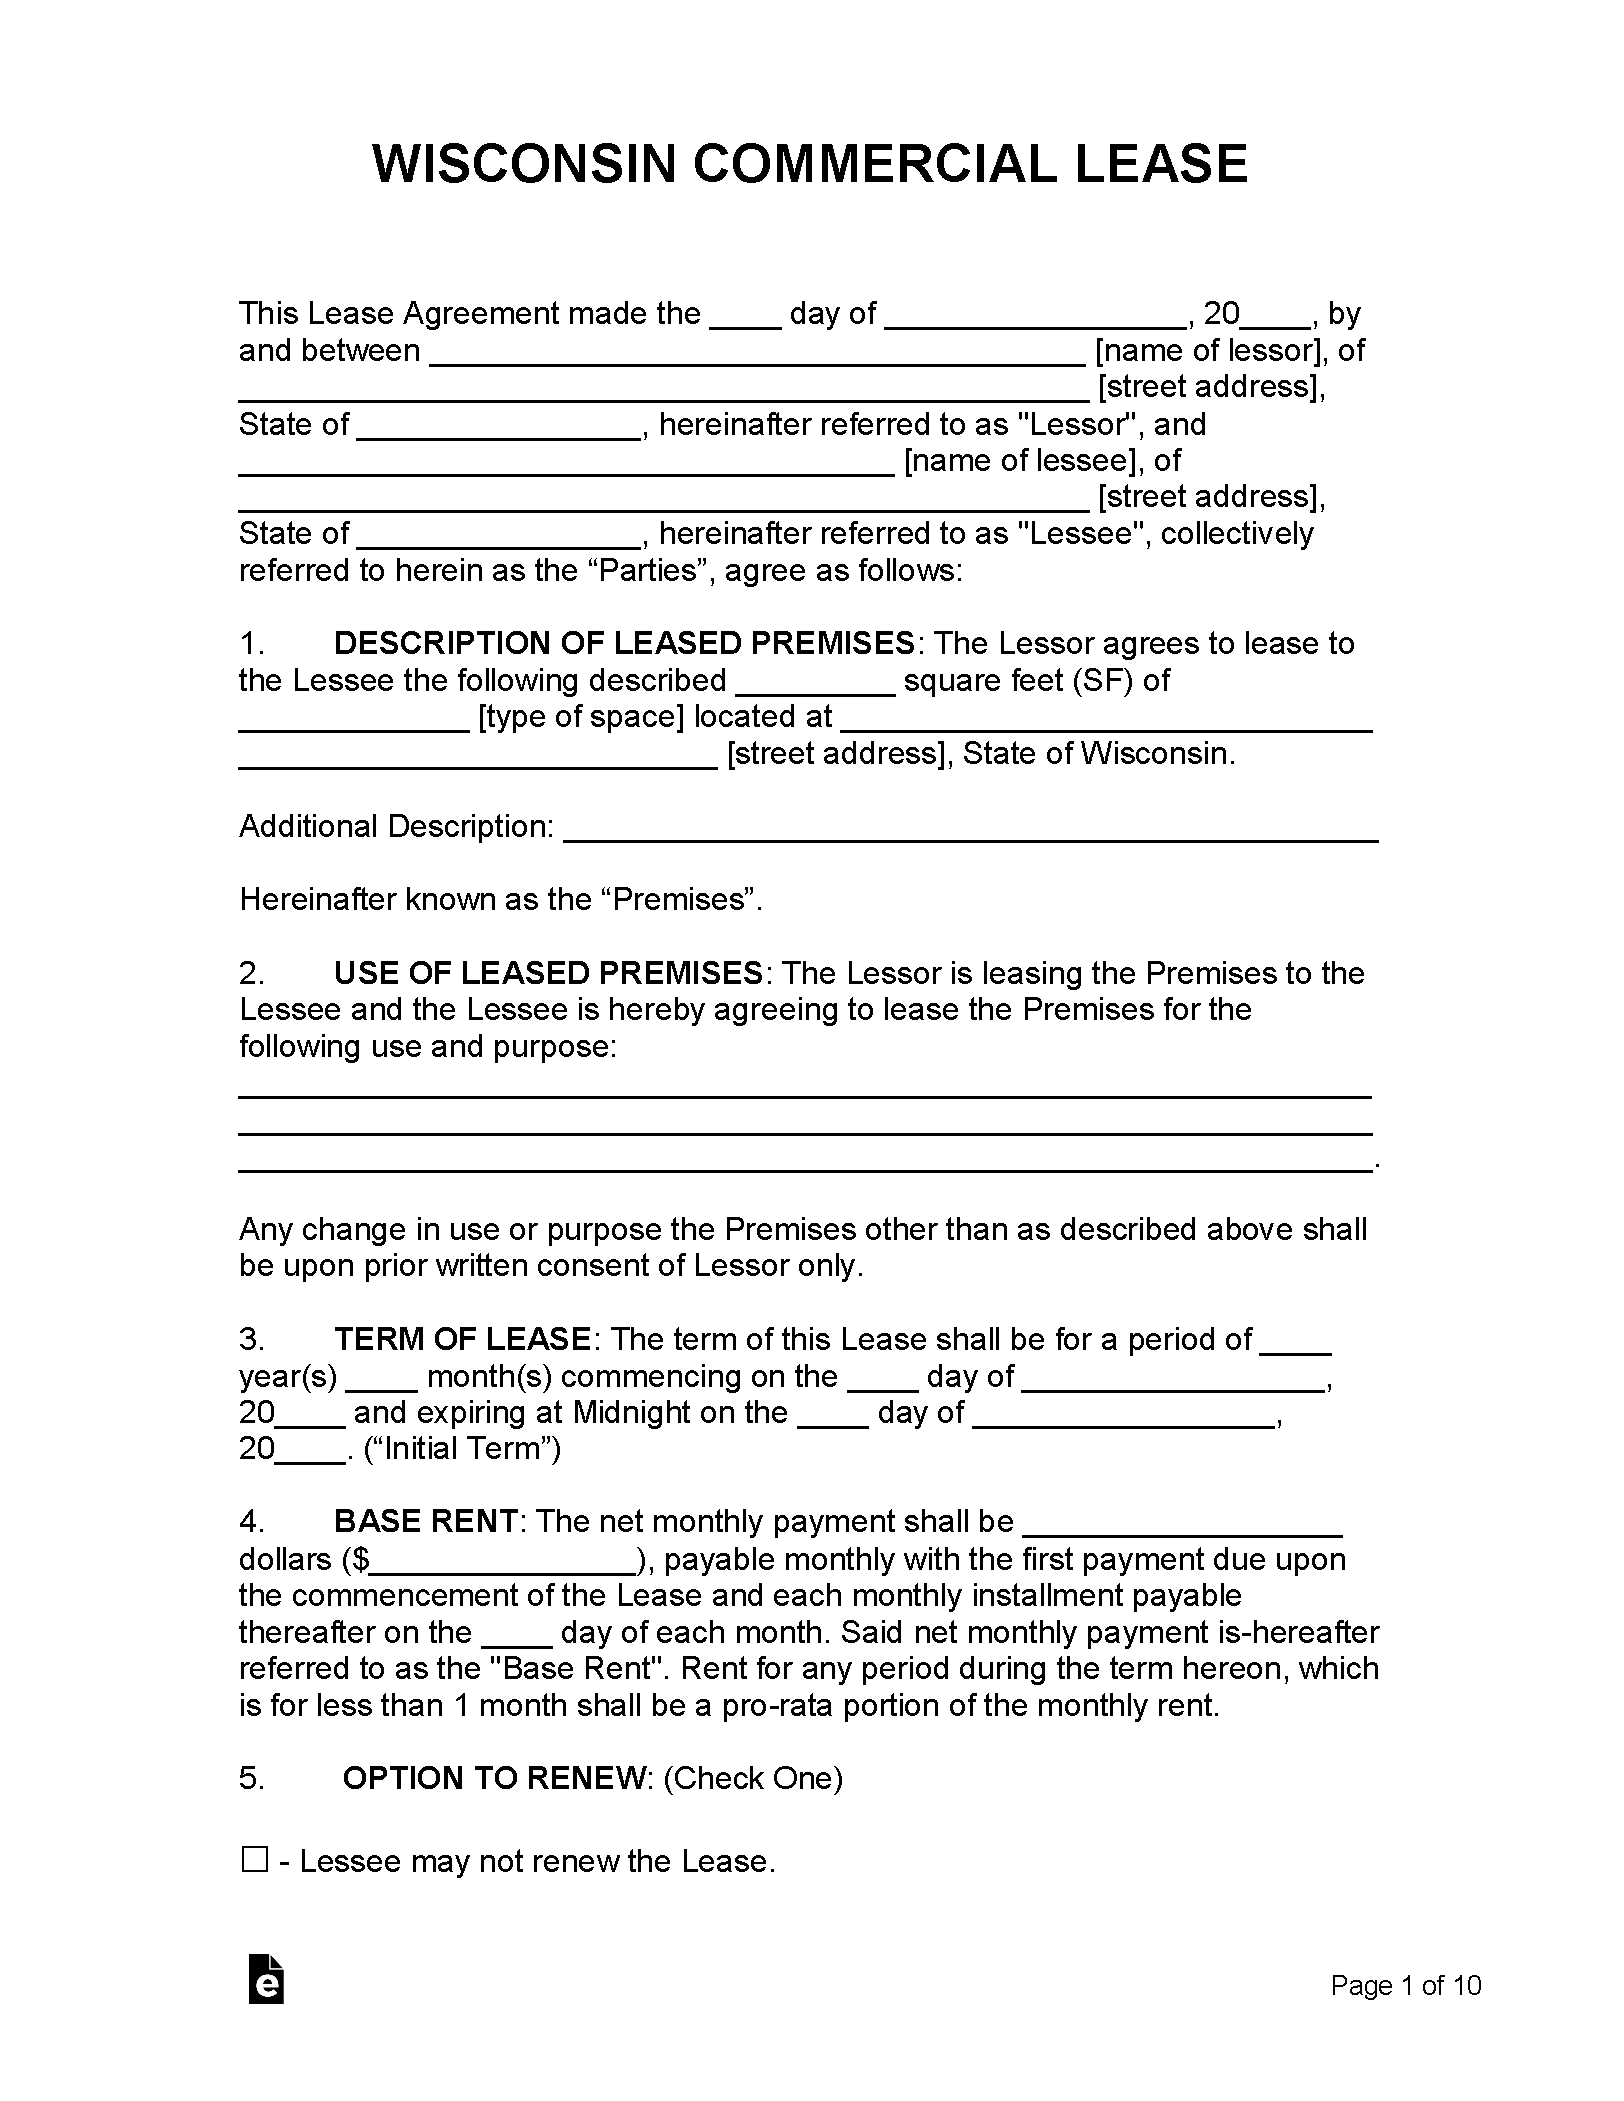 wisconsin-lease-agreement-templates-6